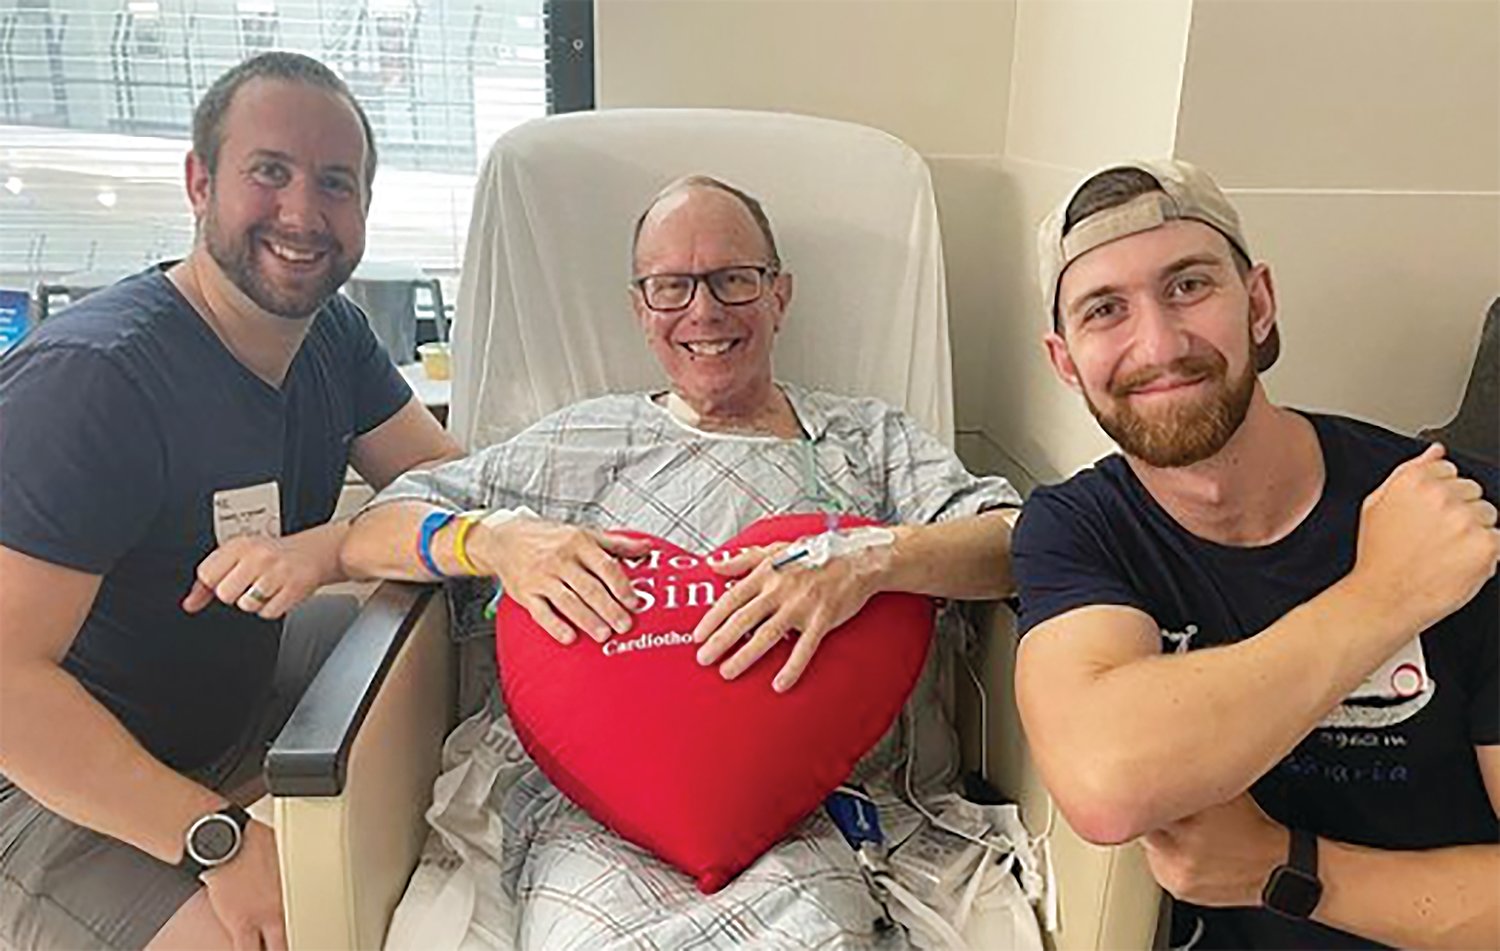 In this photo from Father Henry Zinno’s Instagram account, the pastor of Our Lady of Mount Carmel in Bristol holds up a stuffed heart in the cardiac unit of Mount Sinai Hospital. He is joined by his nephews, Kevin and Danny.